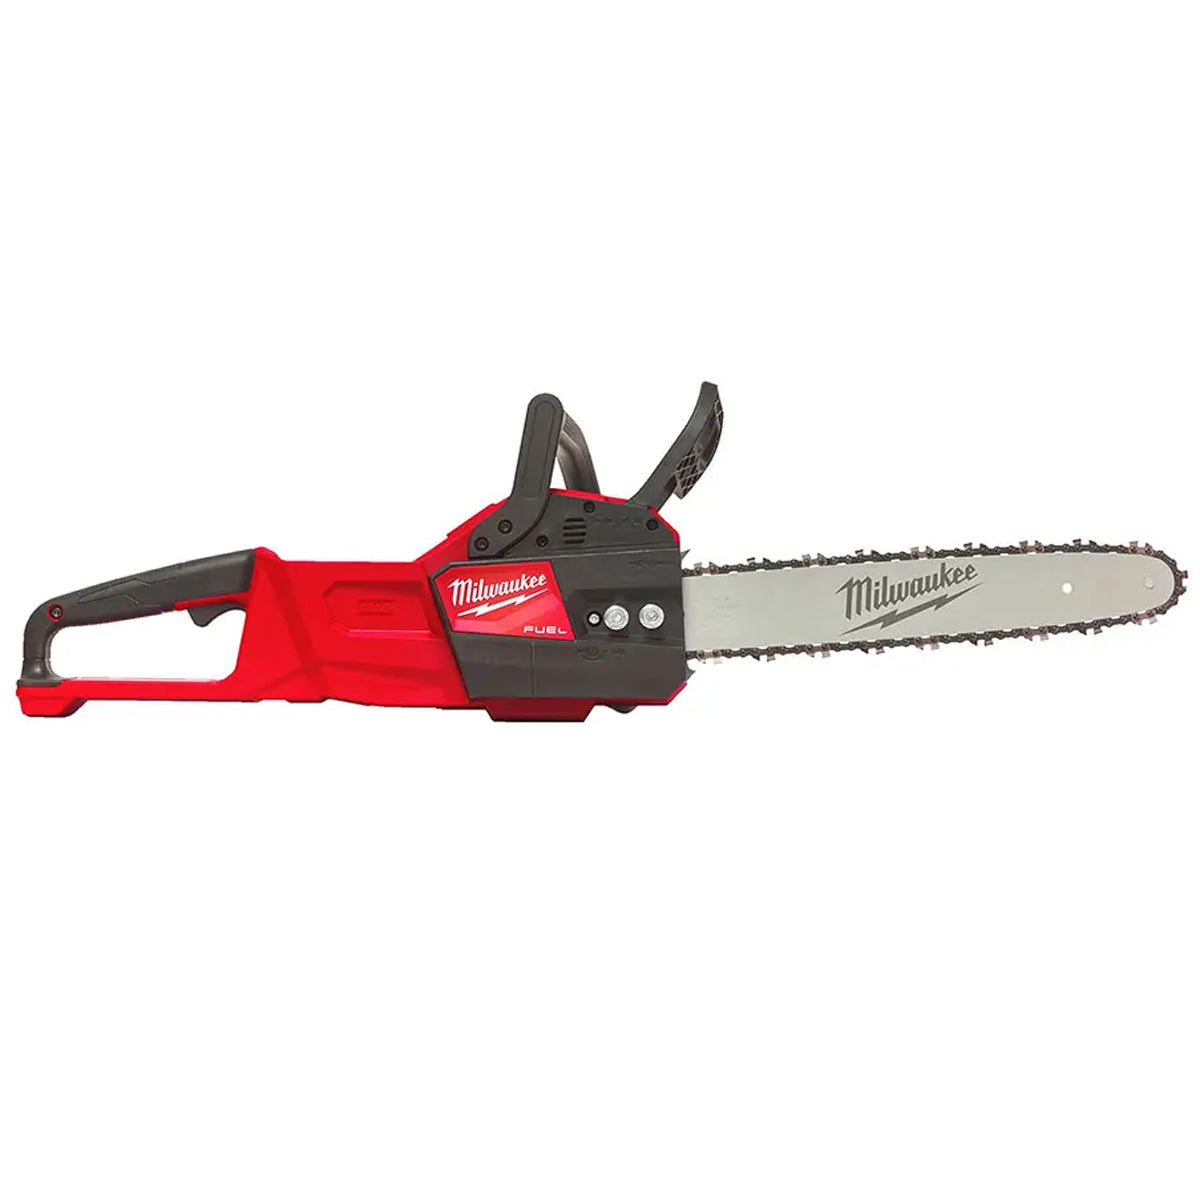 Milwaukee M18FCHS35-0 18V Fuel Brushless Chainsaw 35cm Bar with 1 x 5.0Ah Battery & Charger